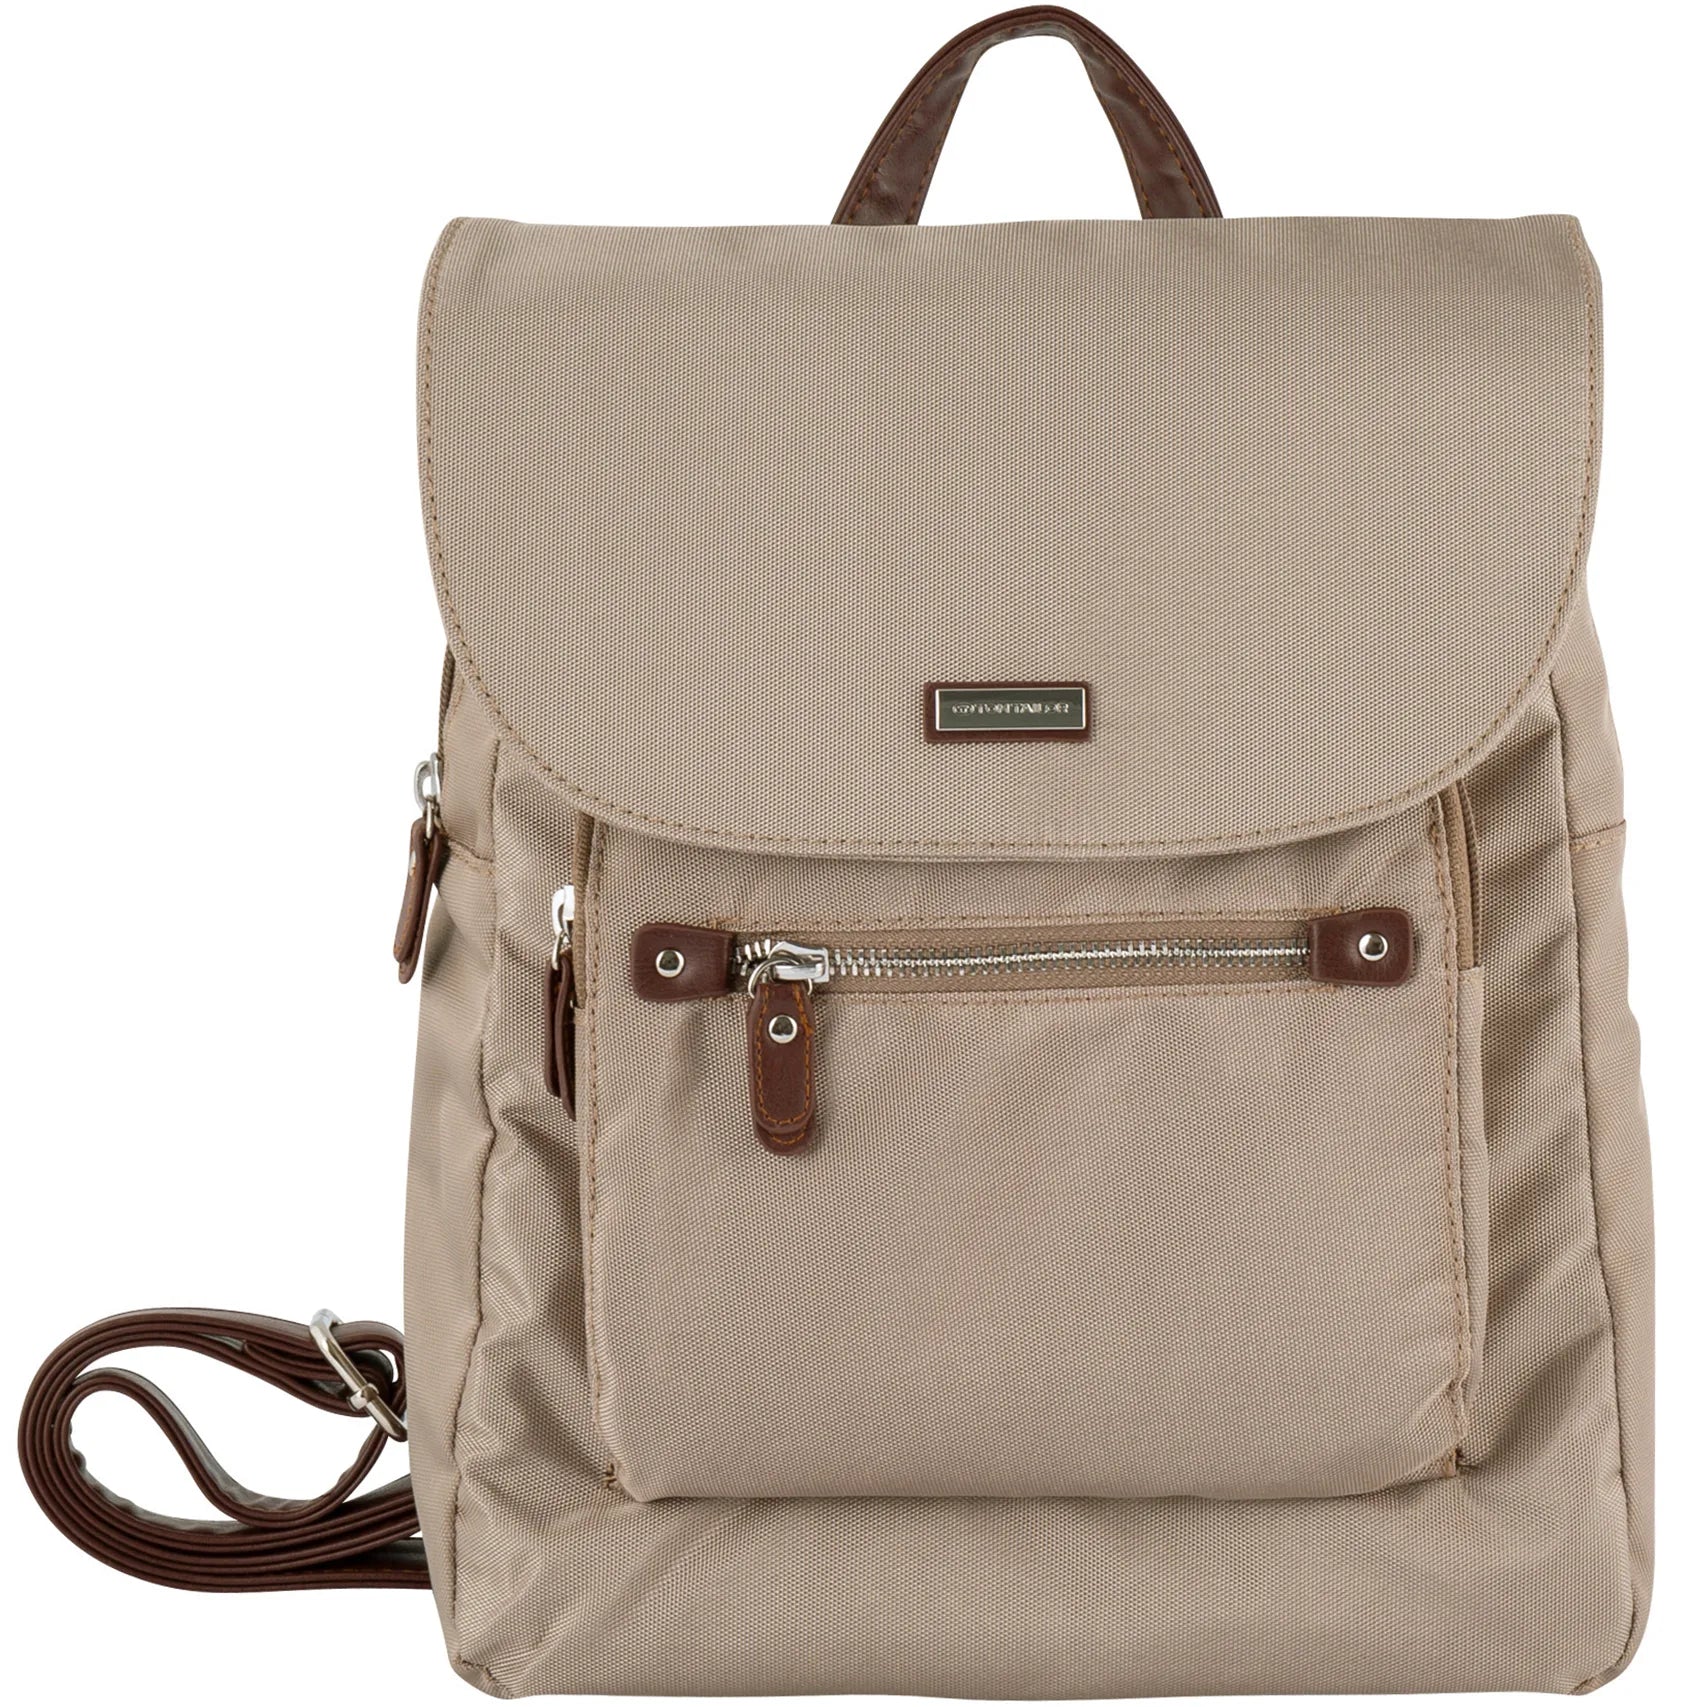 Tom Tailor Bags Rina Backpack 31 cm - taupe